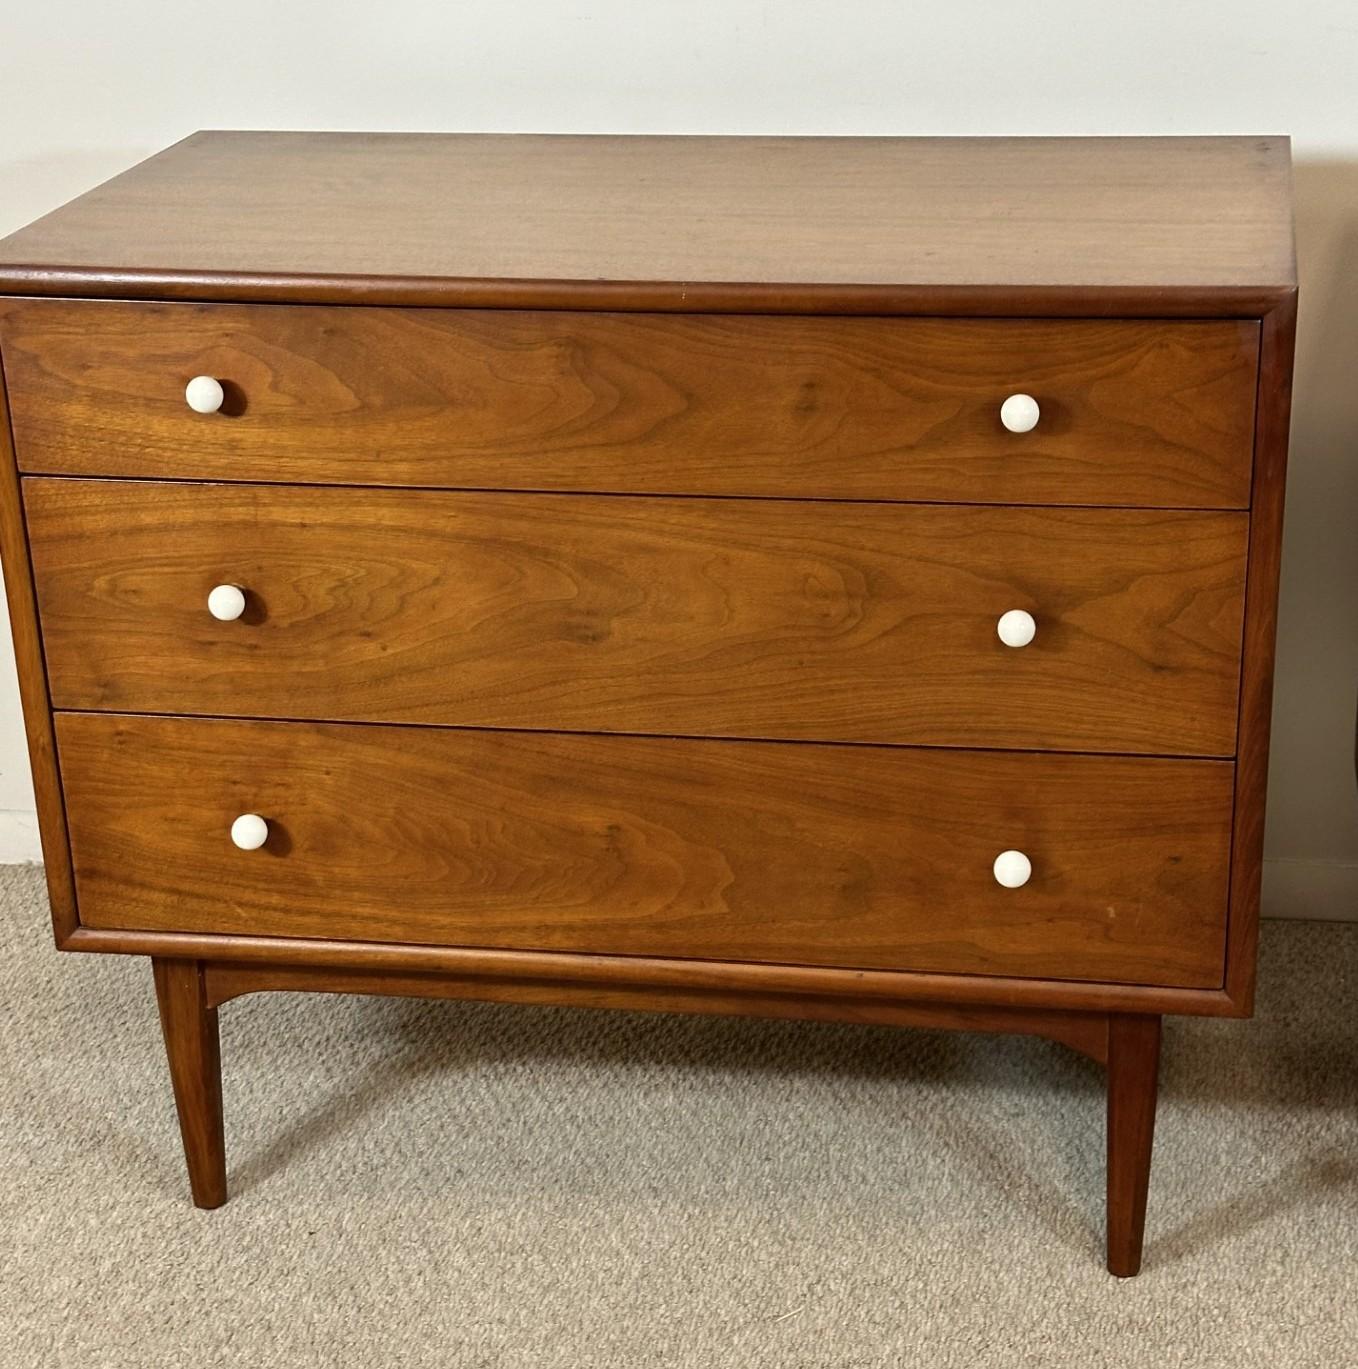 Pair of lovely Kipp Stewart Declaration by Drexel 3-drawer walnut bachelor chests from the 1960's. Drawers feature round white porcelain pulls and dovetail construction. Sits on a base with round tapered legs. 36